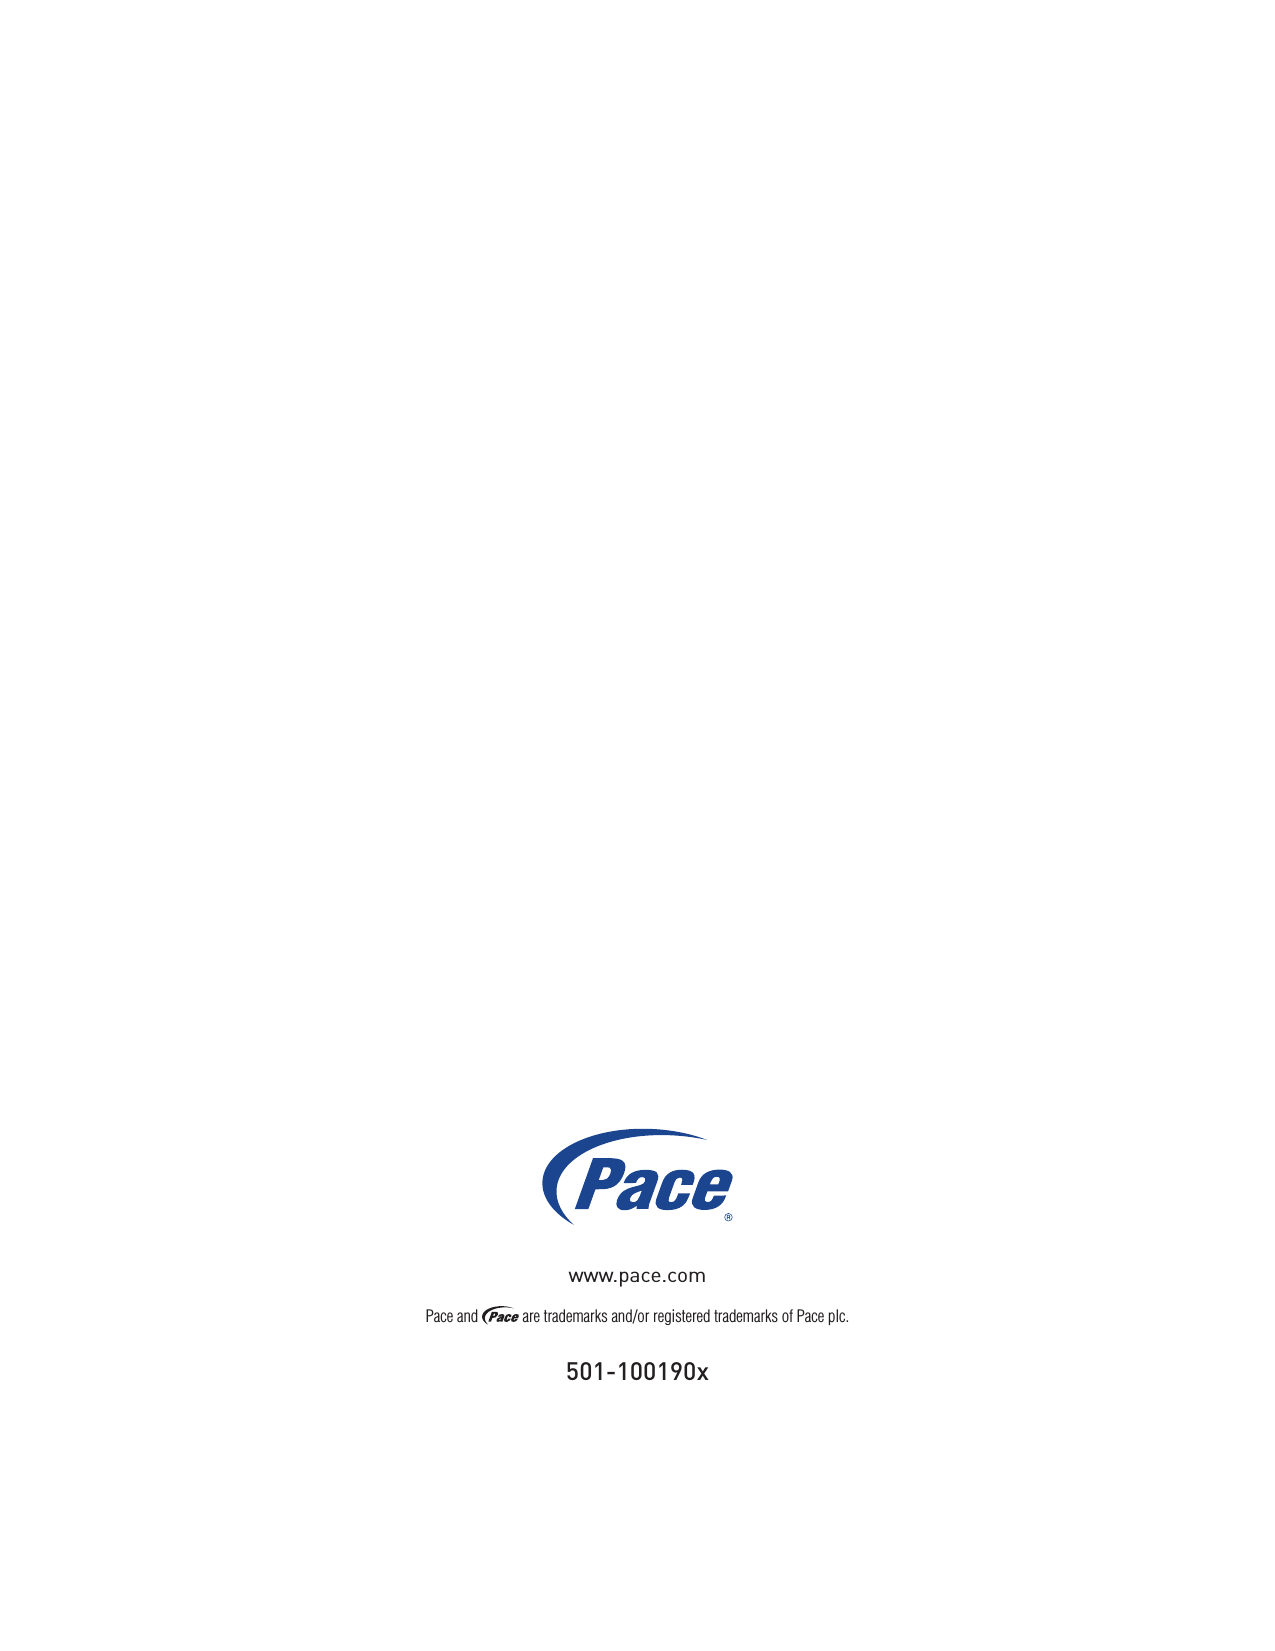 501-100190xPace and   are trademarks and/or registered trademarks of Pace plc.www.pace.com